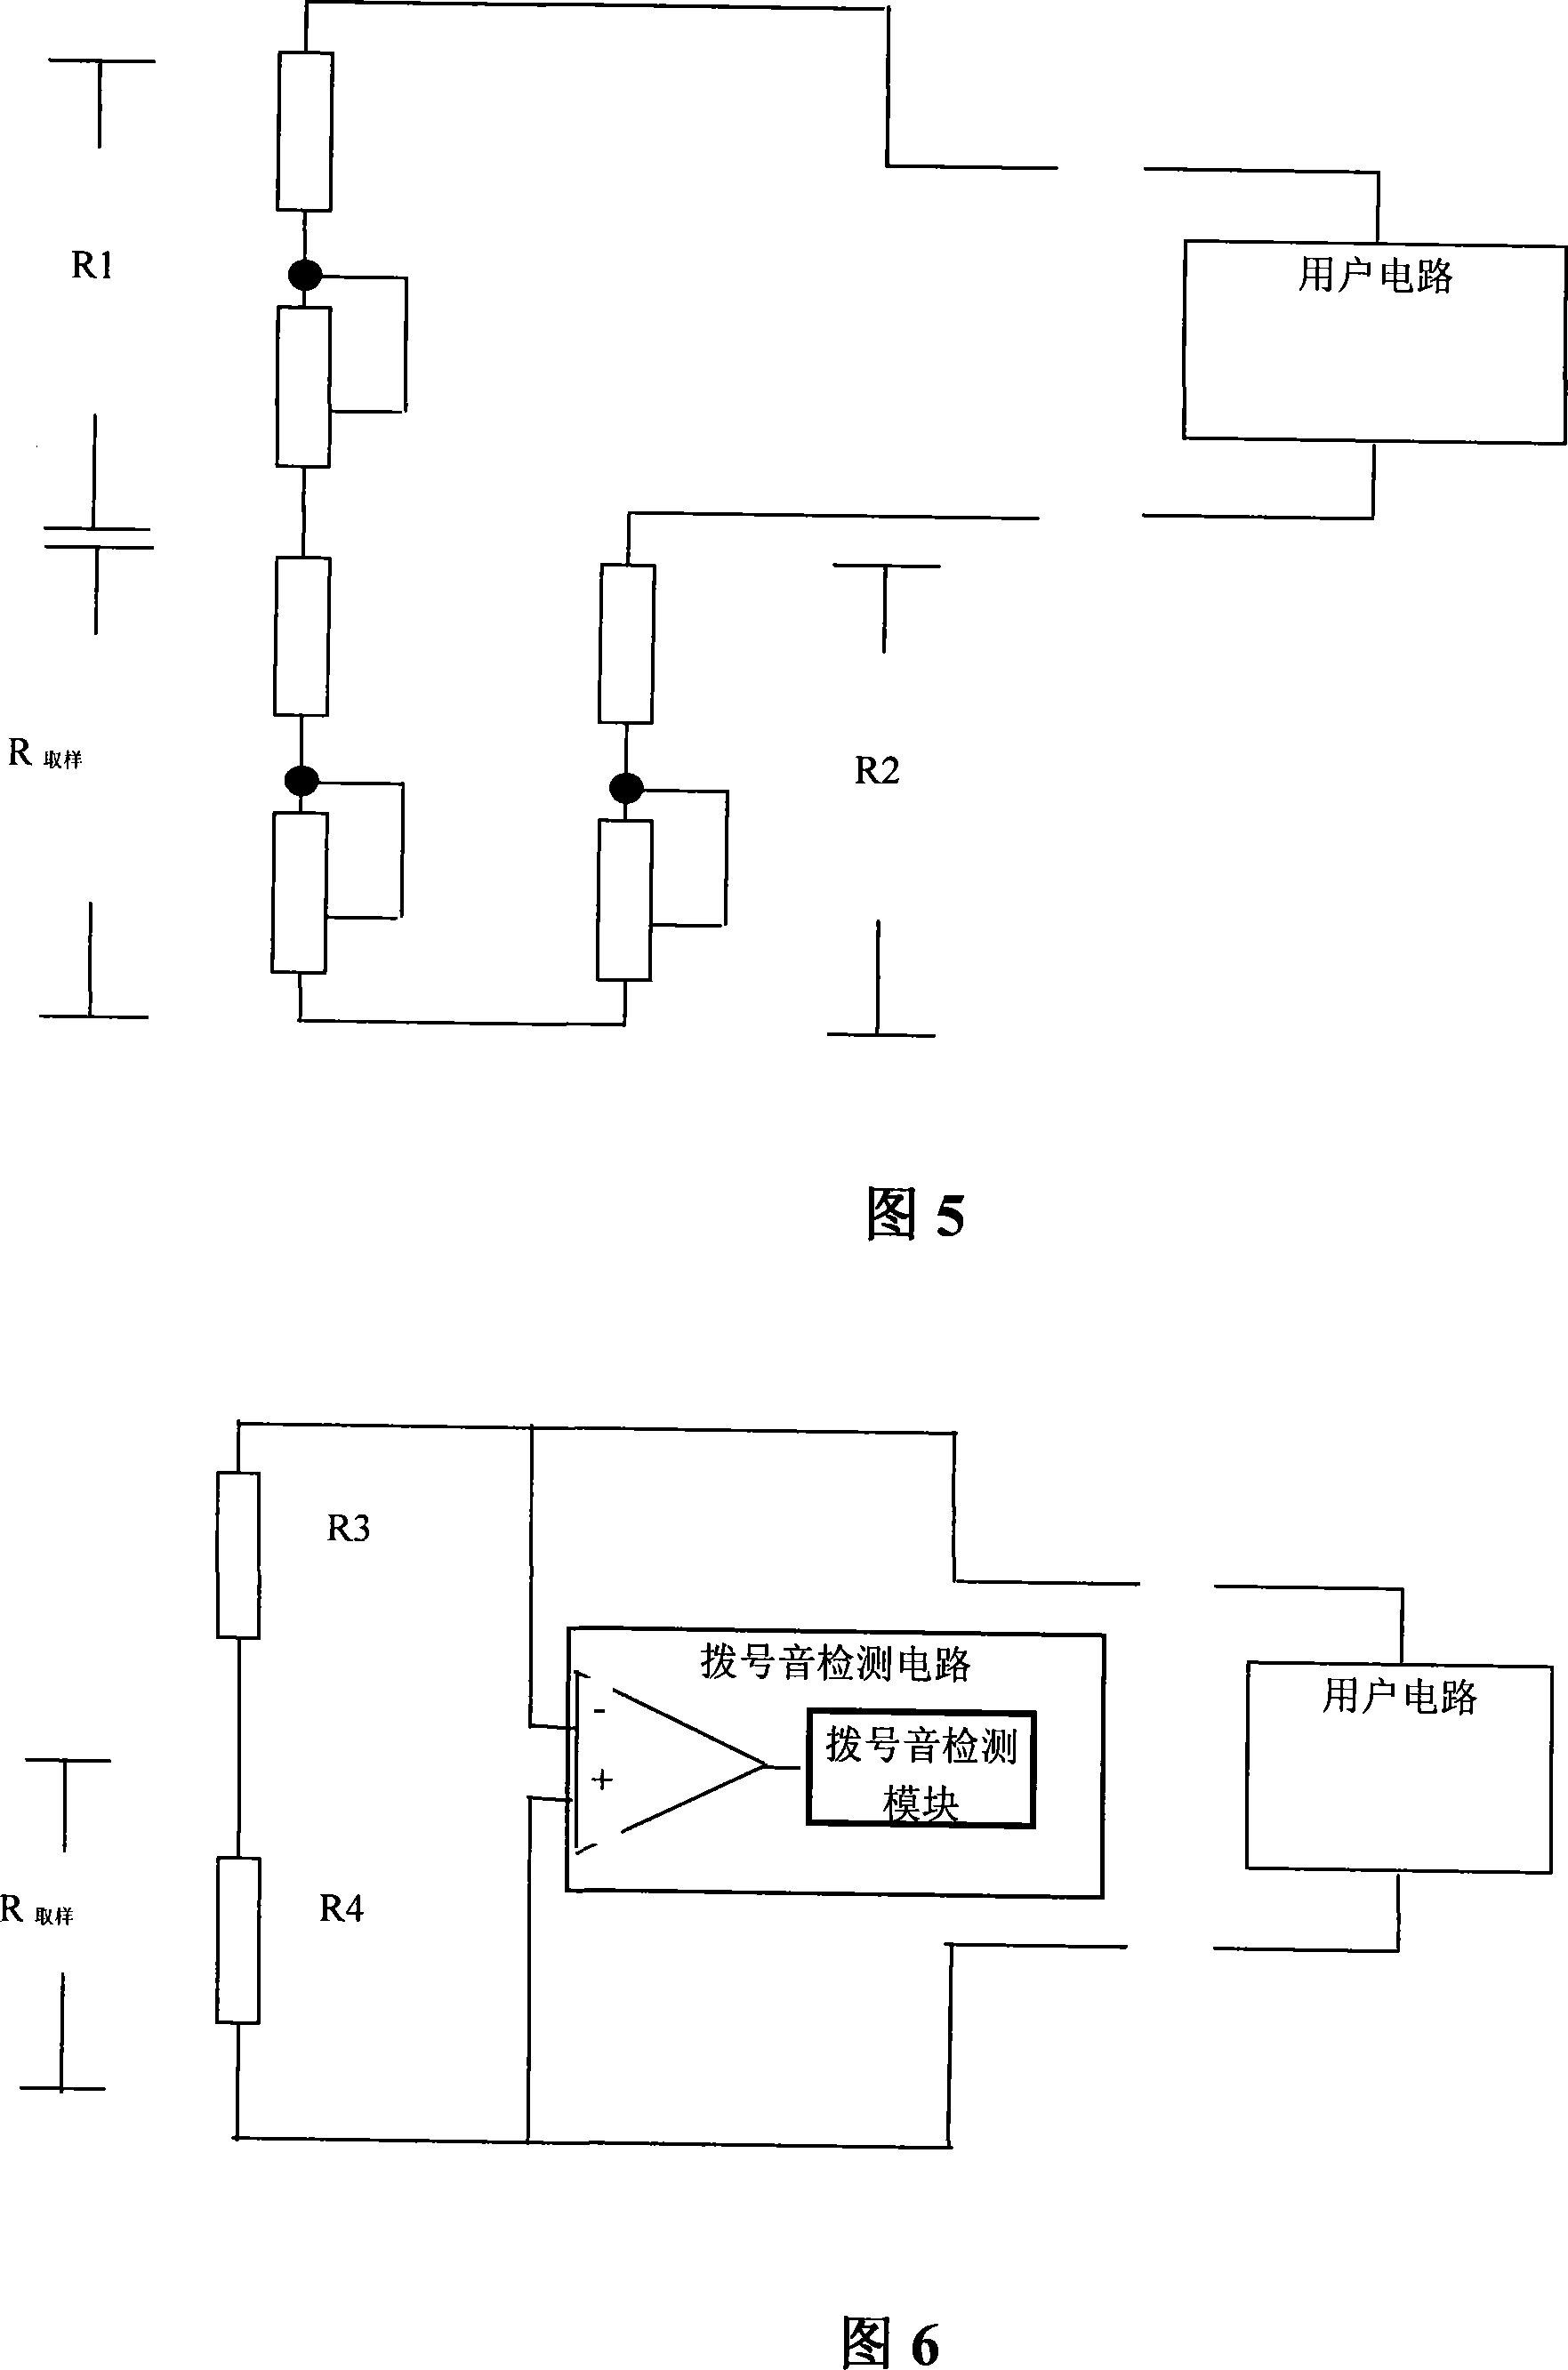 User line and user circuit testing system and method